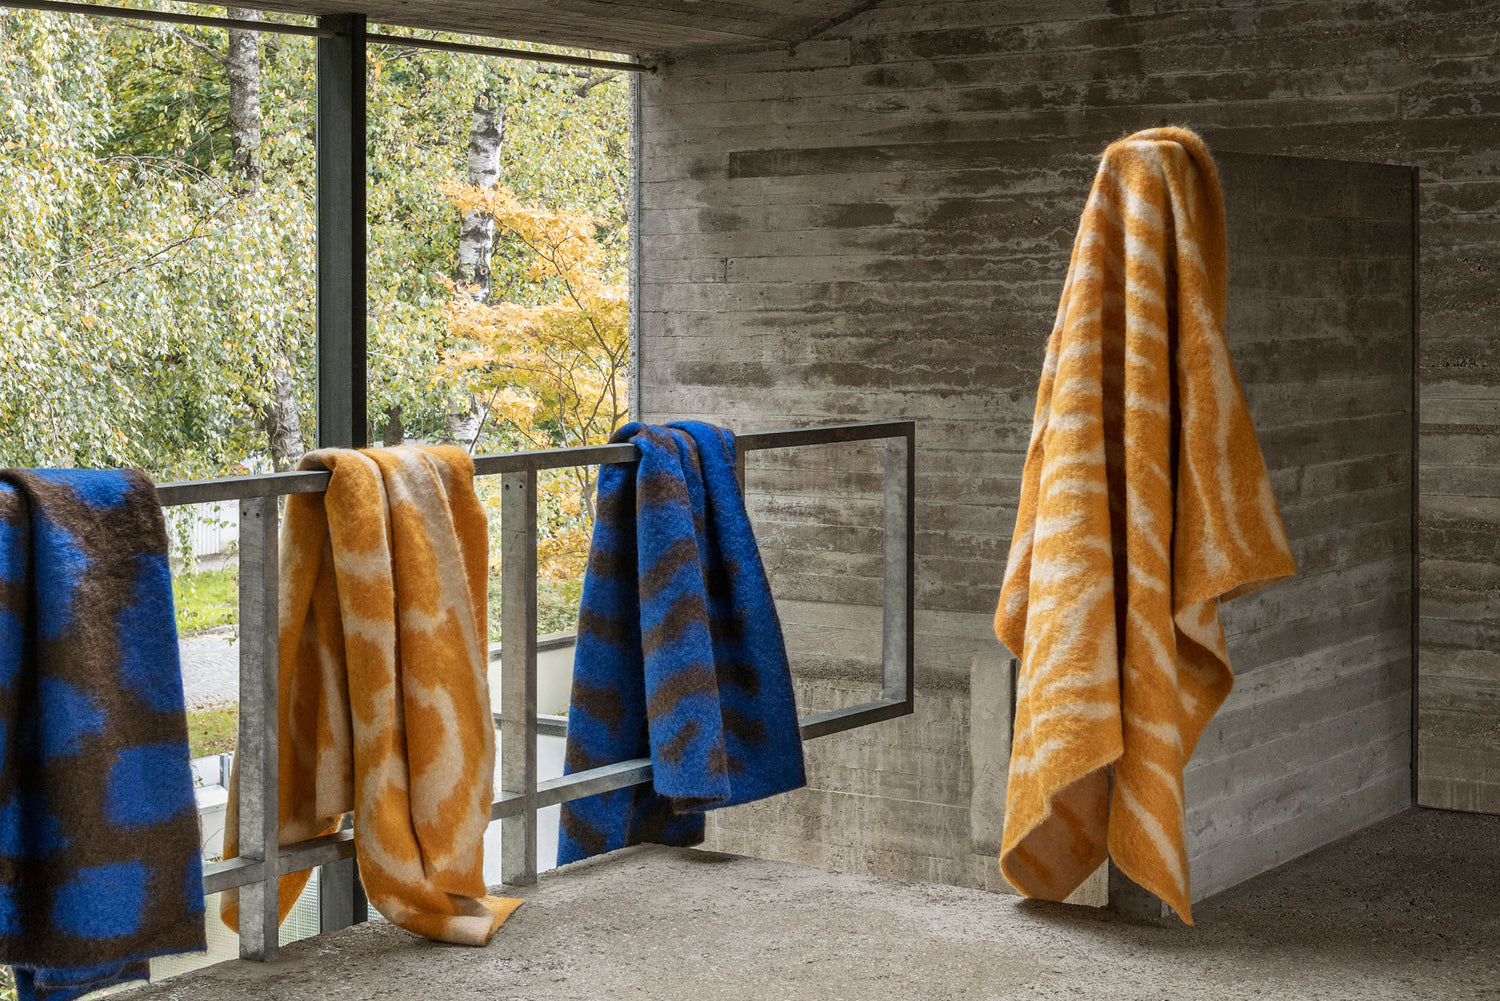 A landscape image featuring 4 Monster Throws draped over a railing.